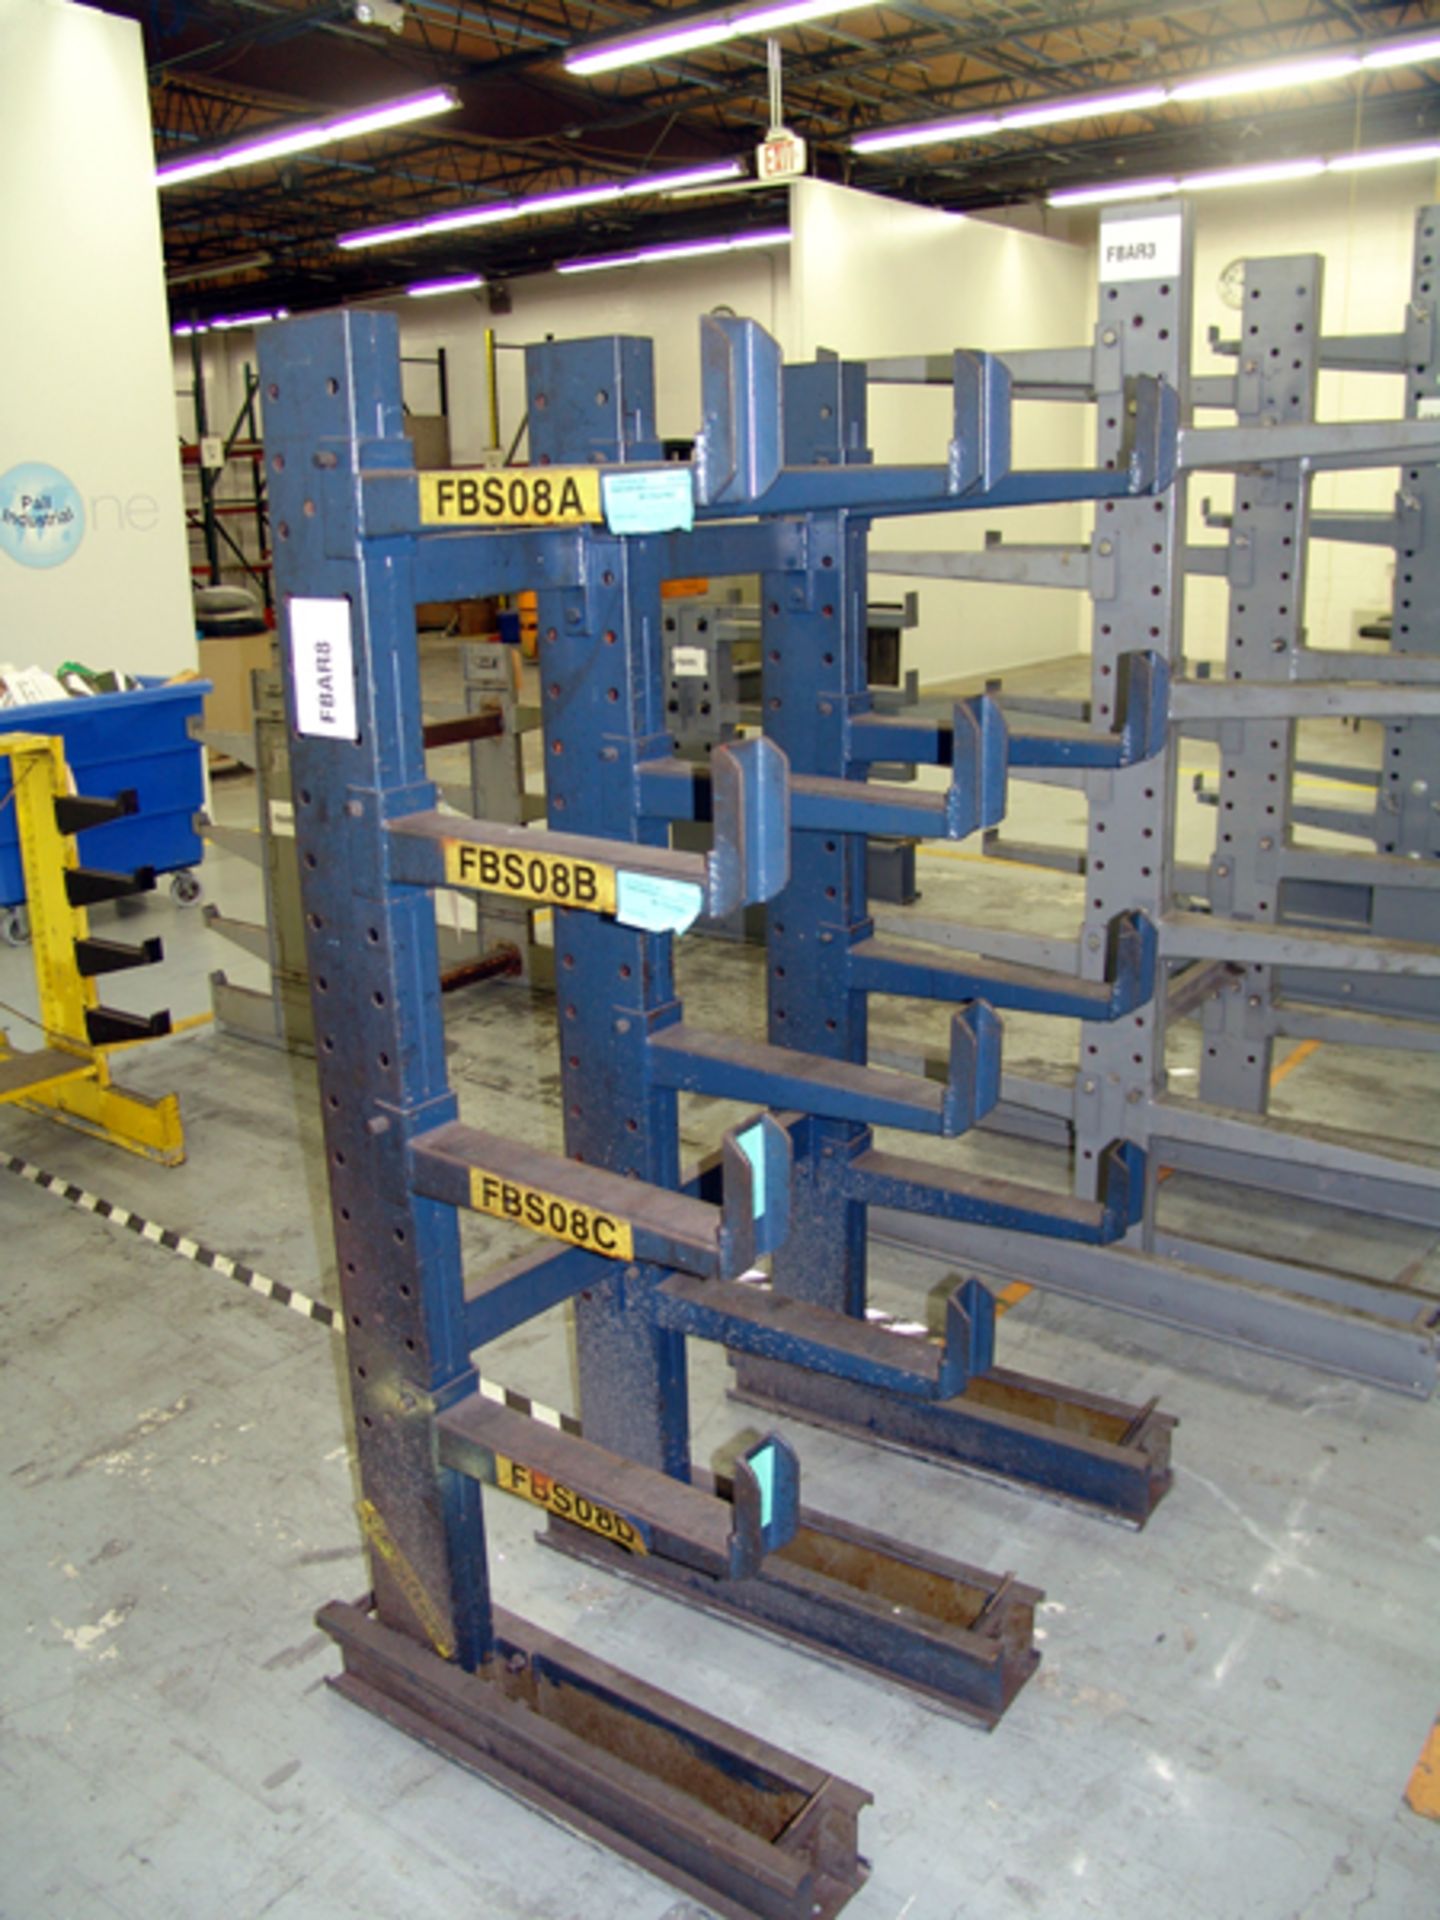 Cantilever Rack, Single Sided, 8 Support Arms, Arm Length: 24", 72" (H) - Image 3 of 3